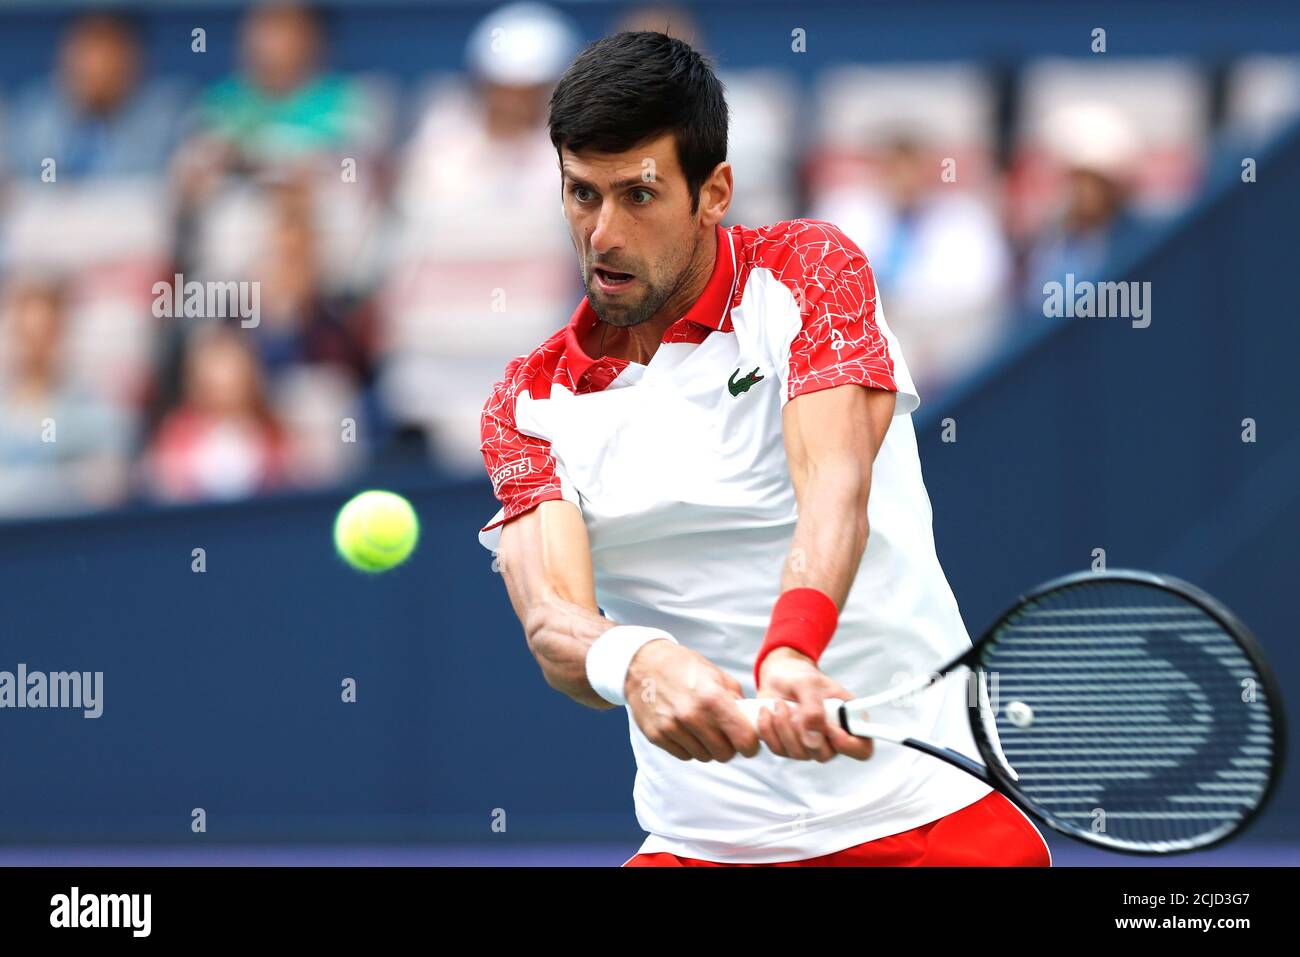 Tennis - Shanghai Masters - Shanghai, China - October 11, 2018 - Novak  Djokovic of Serbia in action against Marco Cecchinato of Italy. REUTERS/Aly  Song Stock Photo - Alamy